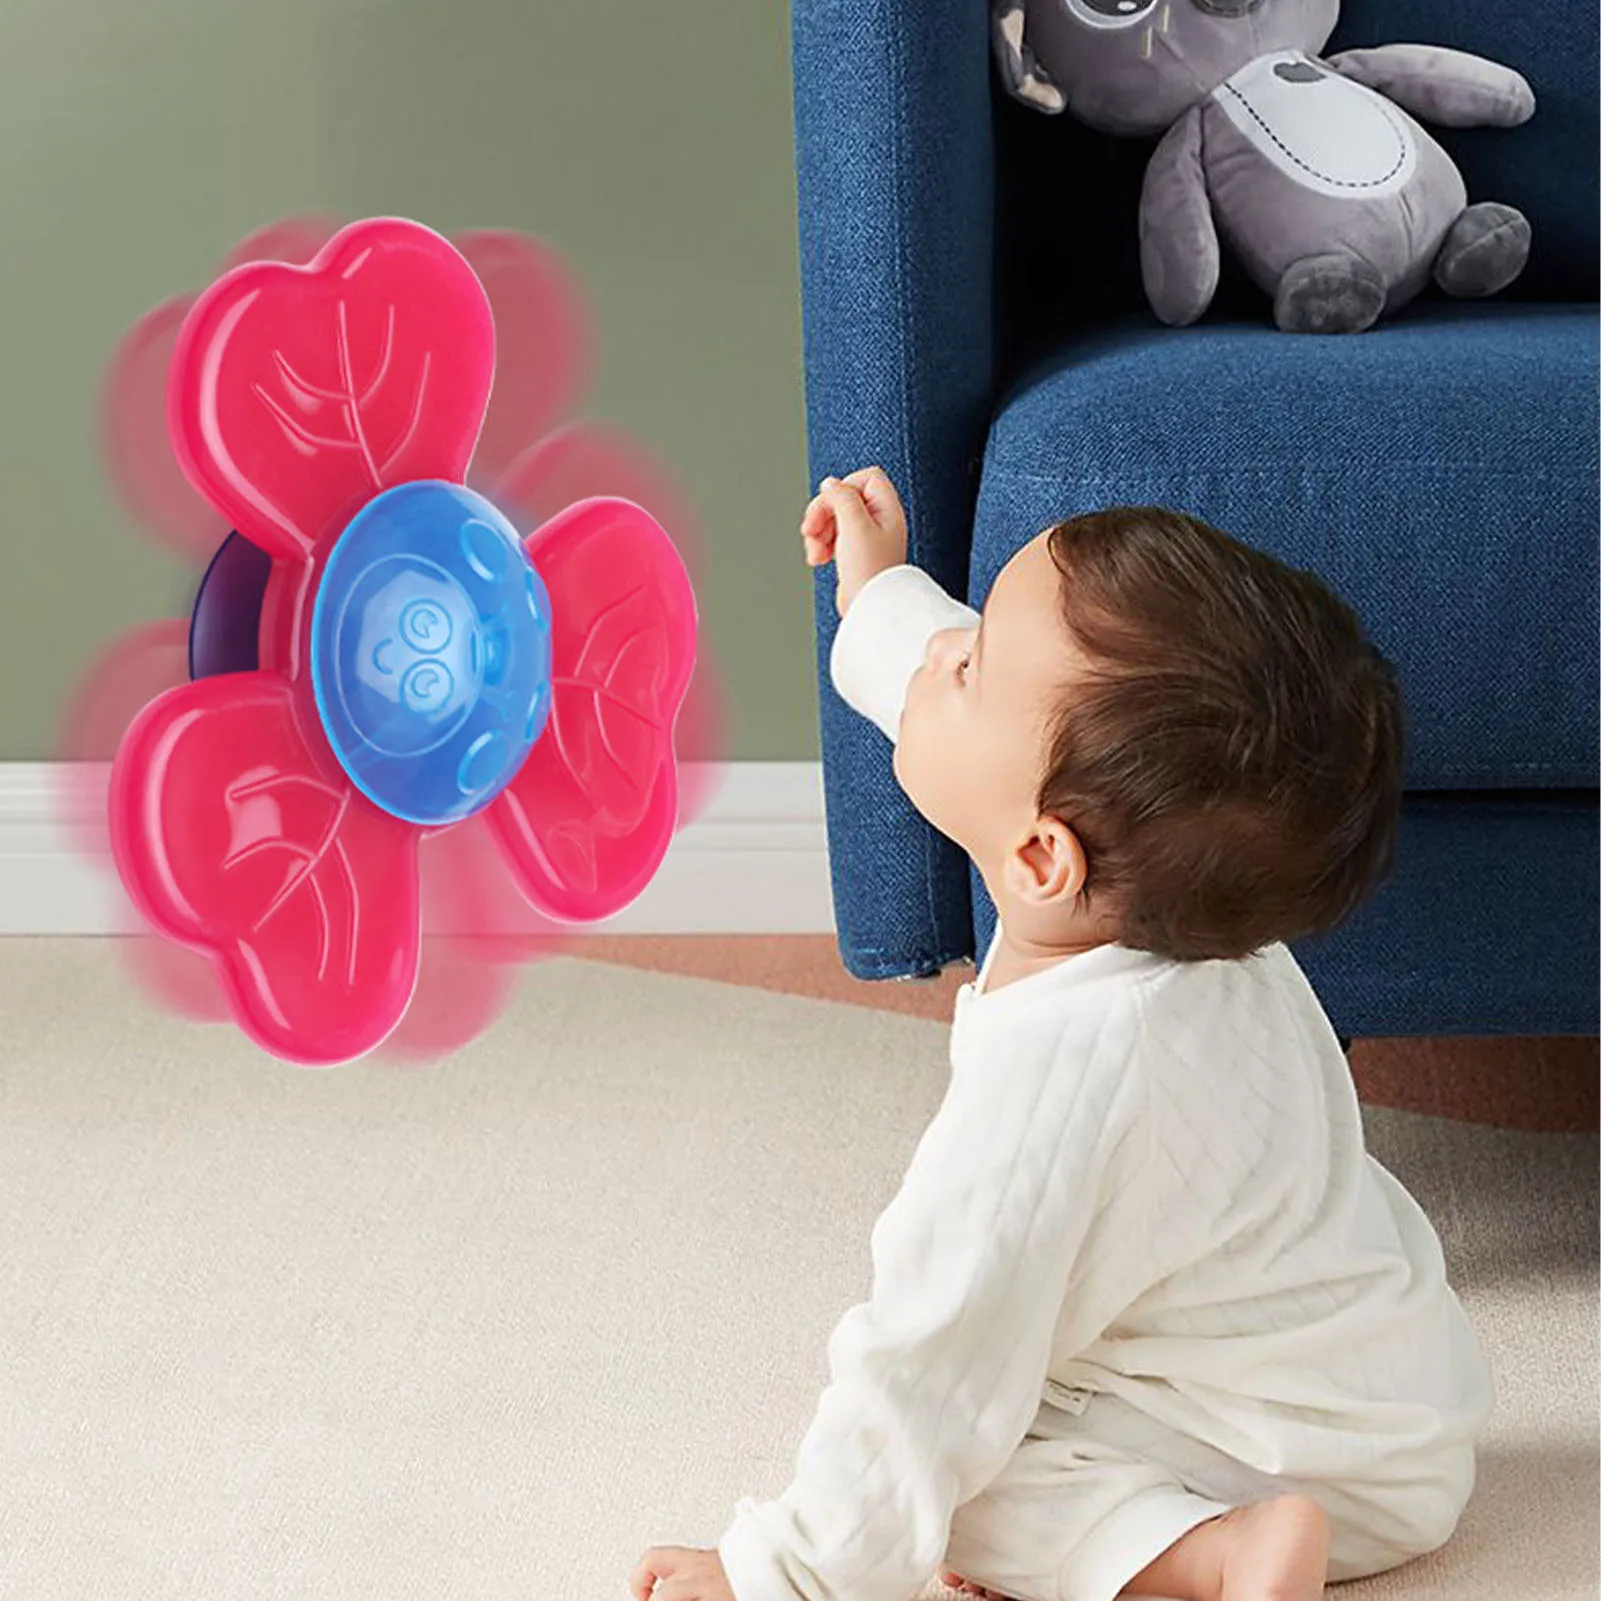 Spinning Top Baby Sucker Top Toy Creative Bath Swimming Water Toys Sucker Suction Cup Fun Game Baby Teether Toys enlarge